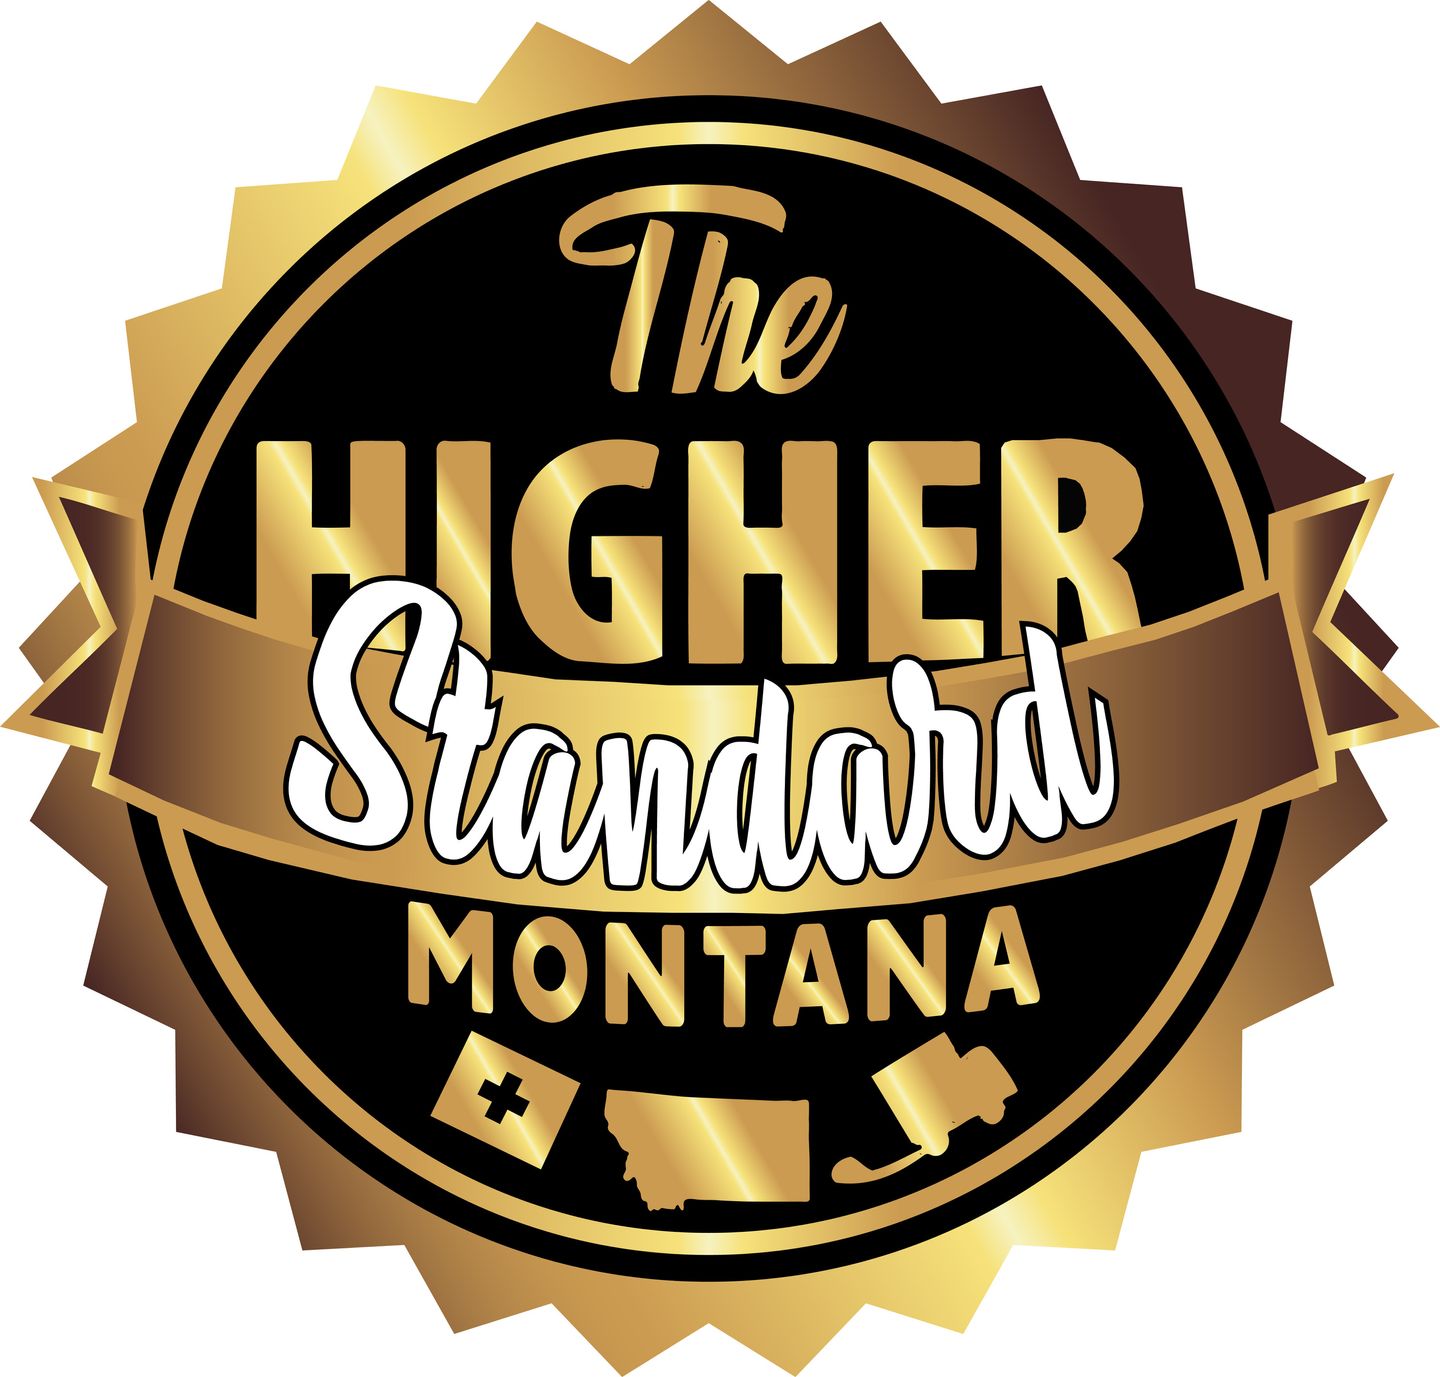 image feature The Higher Standard - Last Chance Gulch